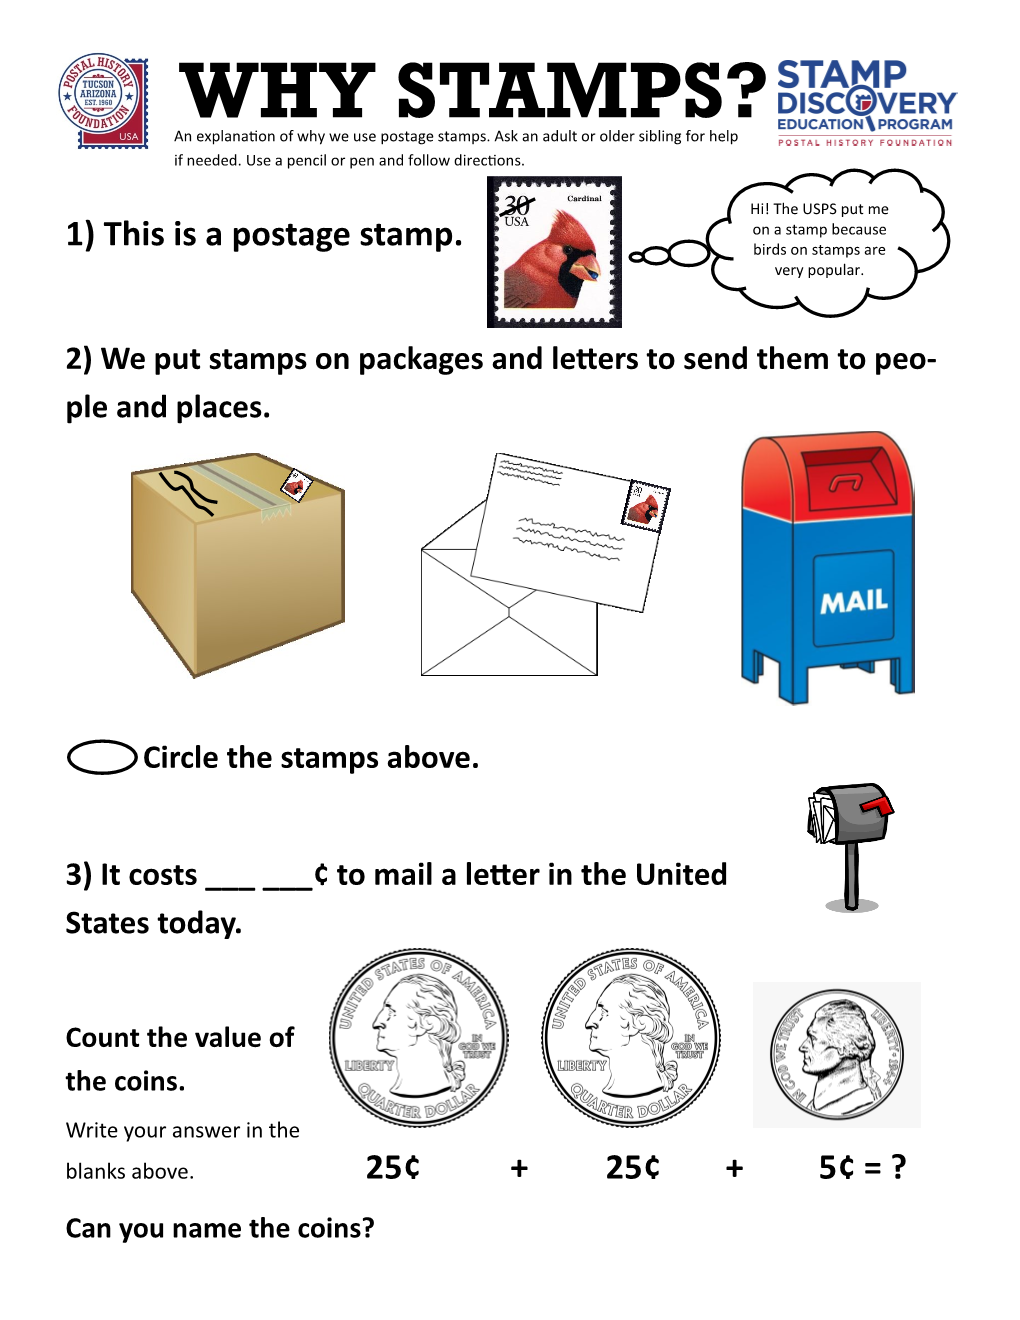 Why We Use Stamps?